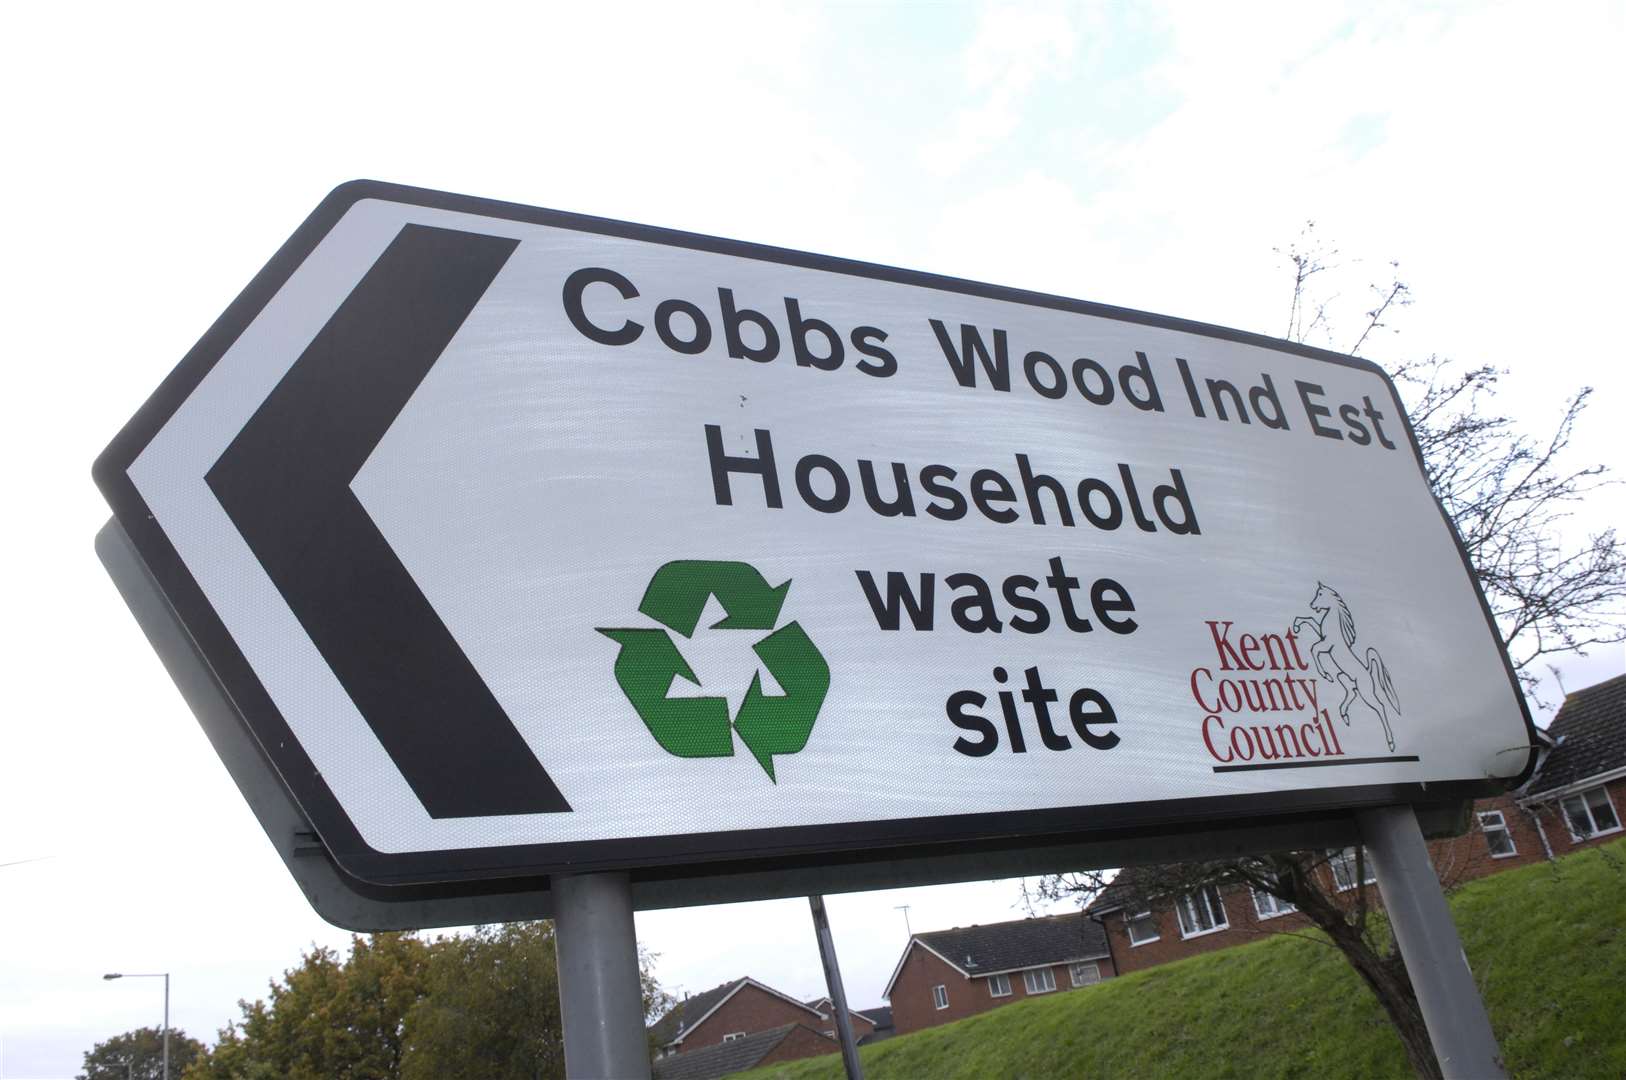 The Cobbs Wood Industrial Estate site will close next week